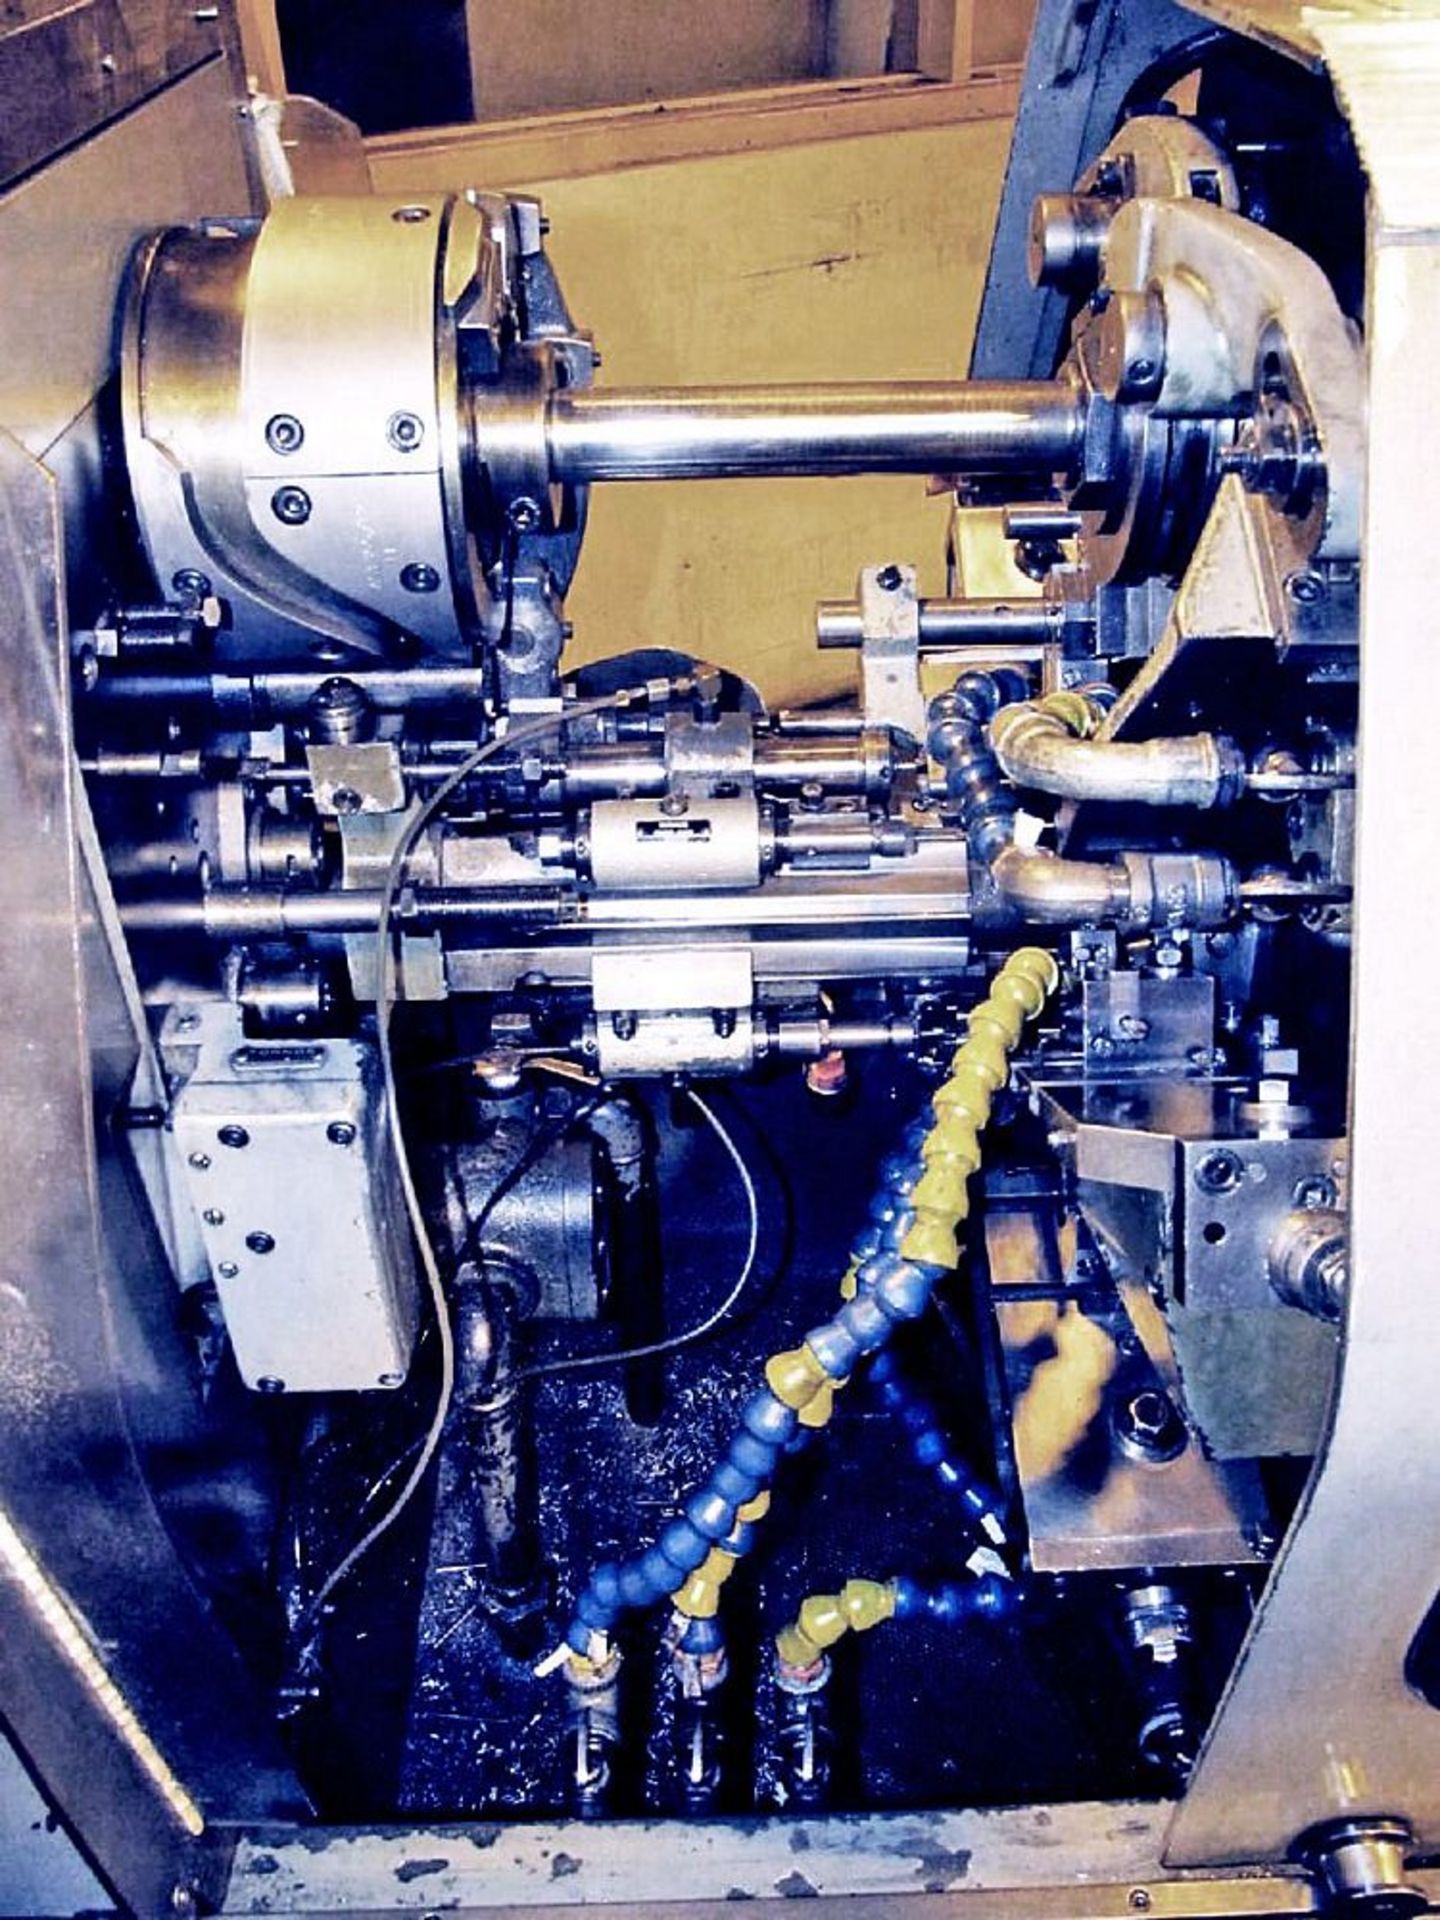 Tornos Model AS14 6-Spindle Automatic Screw Machine - Image 5 of 5